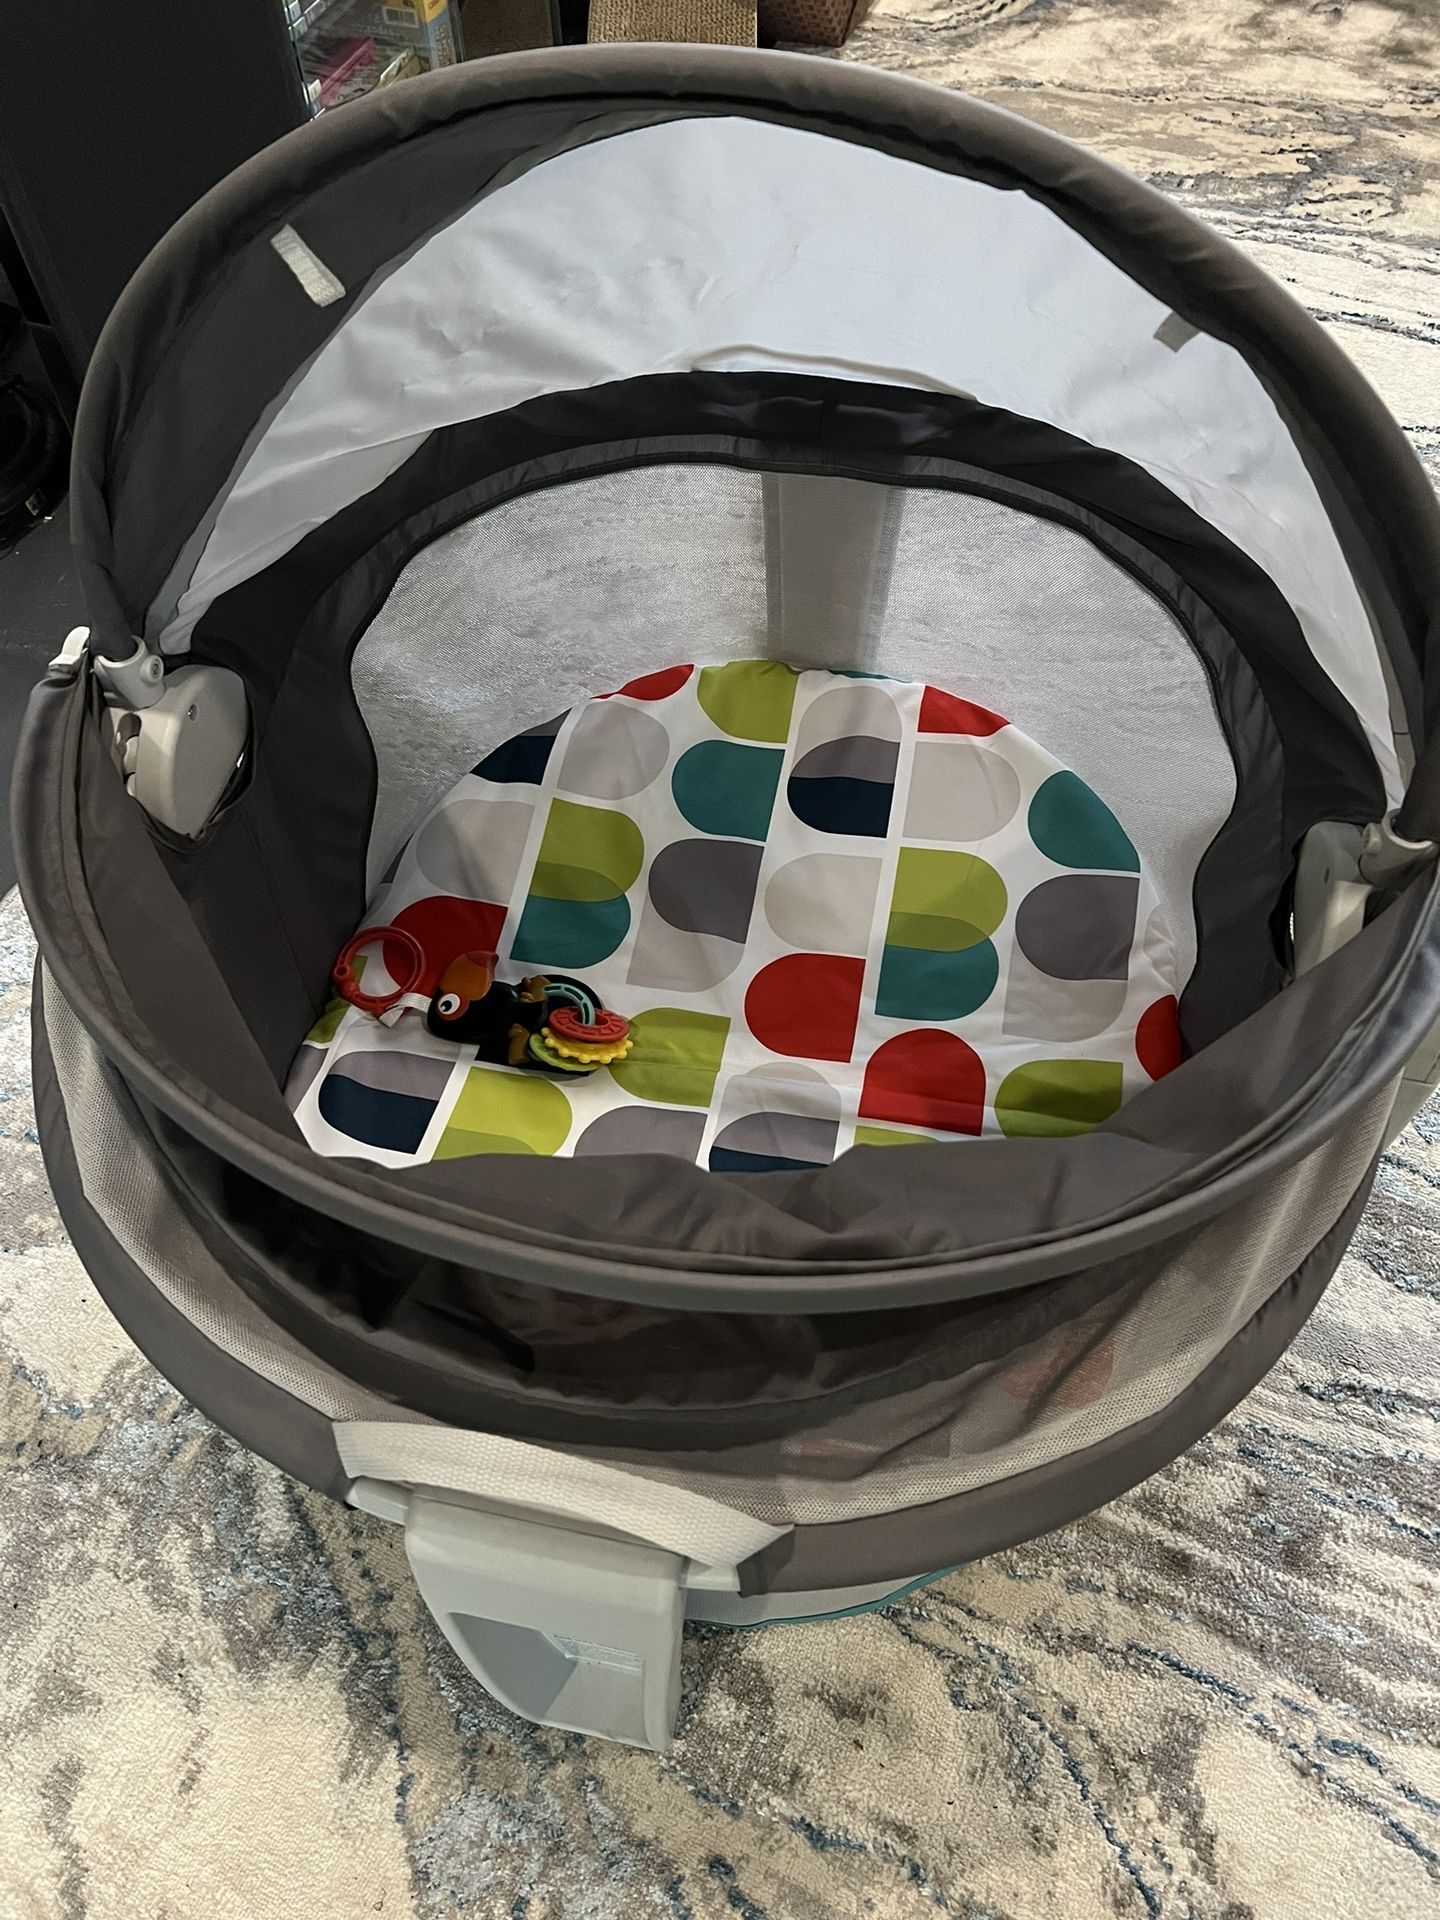 Fisher-Price Baby Dome